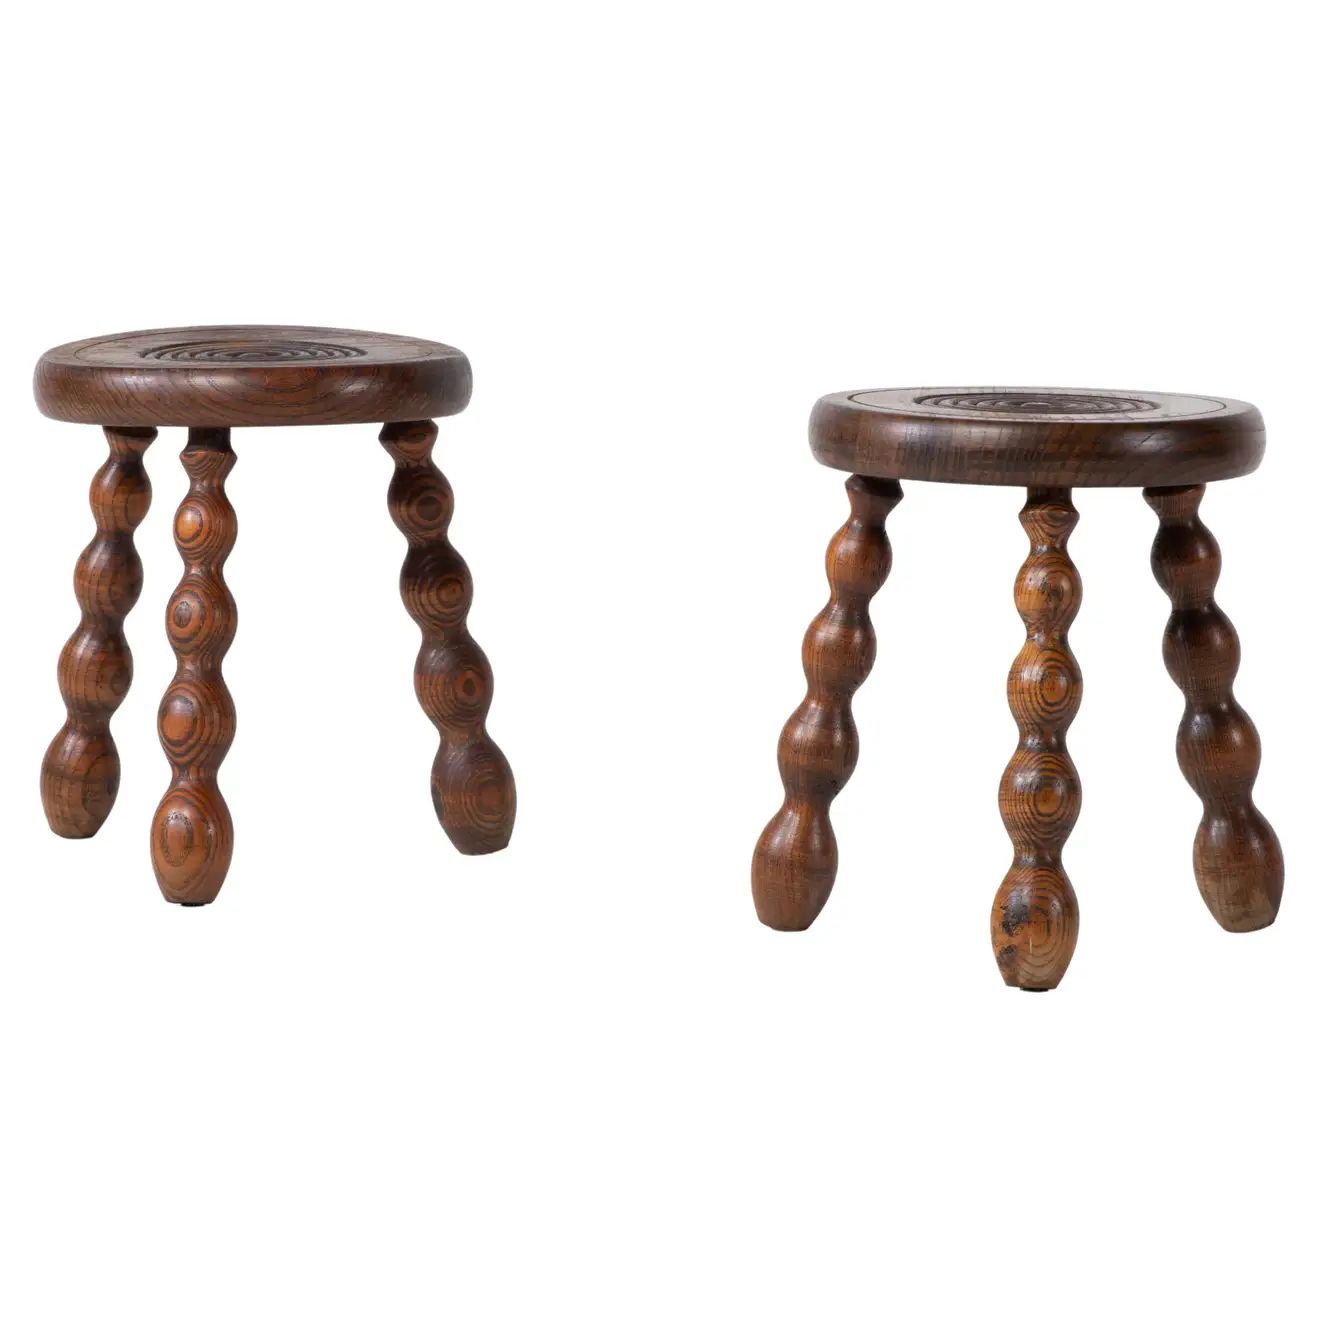 French Brutalist Tripod Stool, a Pair | 1stDibs